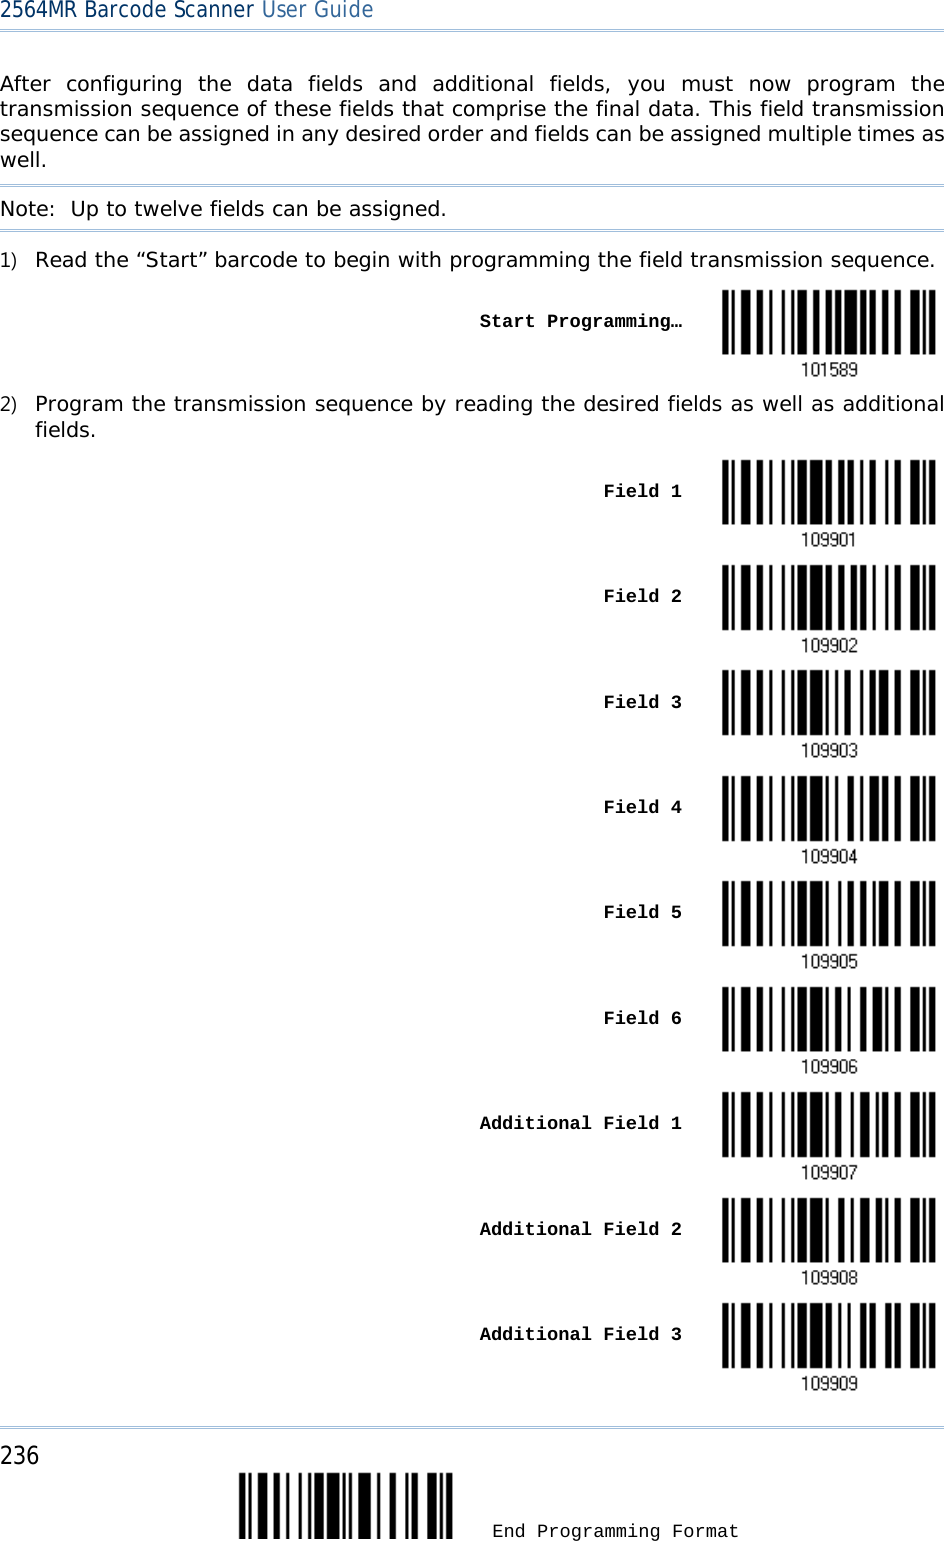 2564MR Barcode Scanner User Guide  After configuring the data fields and additional fields, you must now program the transmission sequence of these fields that comprise the final data. This field transmission sequence can be assigned in any desired order and fields can be assigned multiple times as well.  Note: Up to twelve fields can be assigned. 1) Read the “Start” barcode to begin with programming the field transmission sequence.    Start Programming…  2) Program the transmission sequence by reading the desired fields as well as additional fields.    Field 1     Field 2     Field 3     Field 4     Field 5     Field 6     Additional Field 1     Additional Field 2     Additional Field 3  236  End Programming Format 